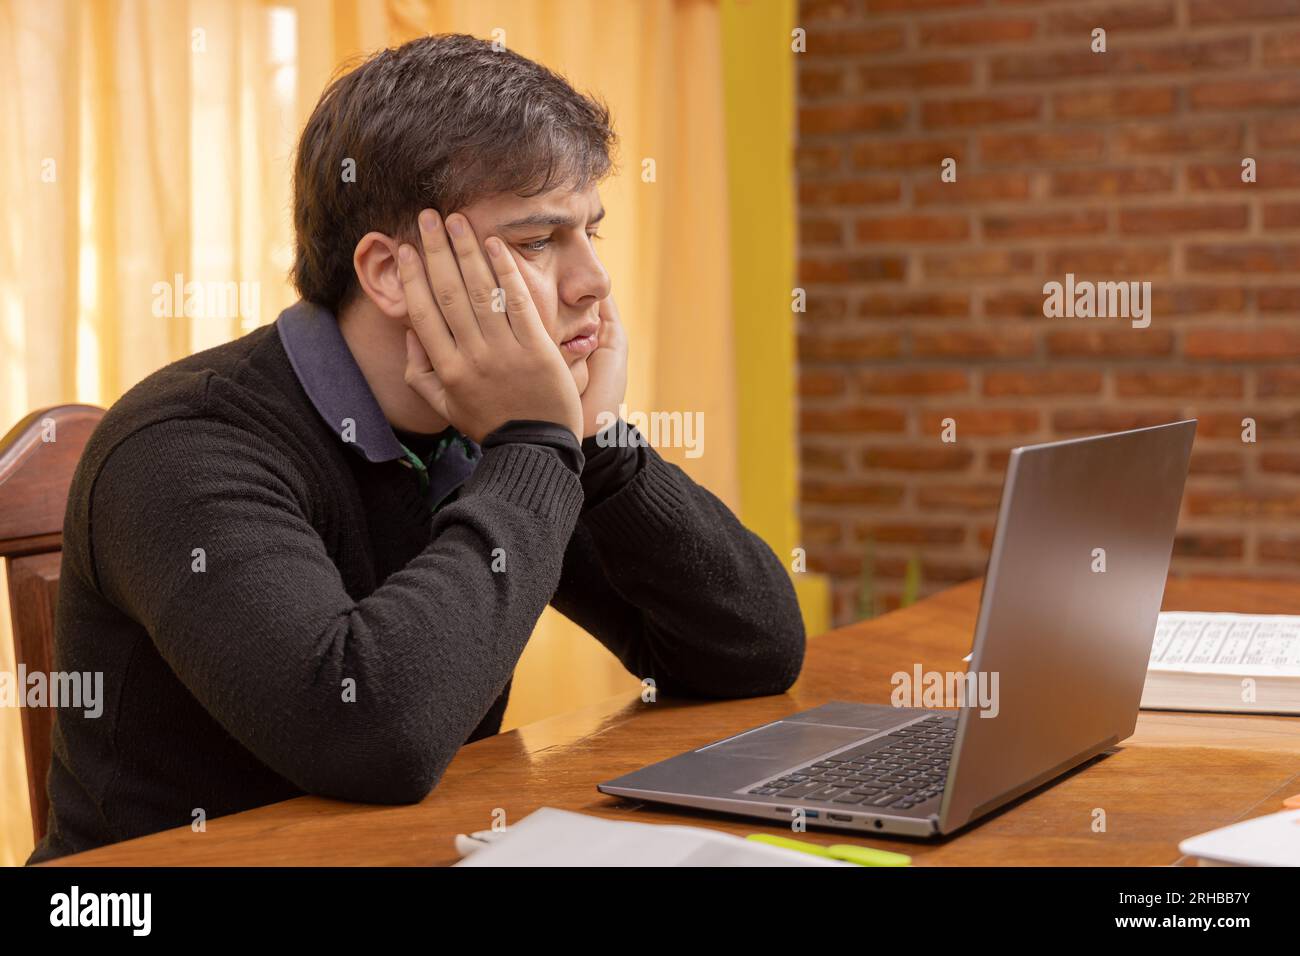 Boy looking worried at a laptop screen. Stock Photo